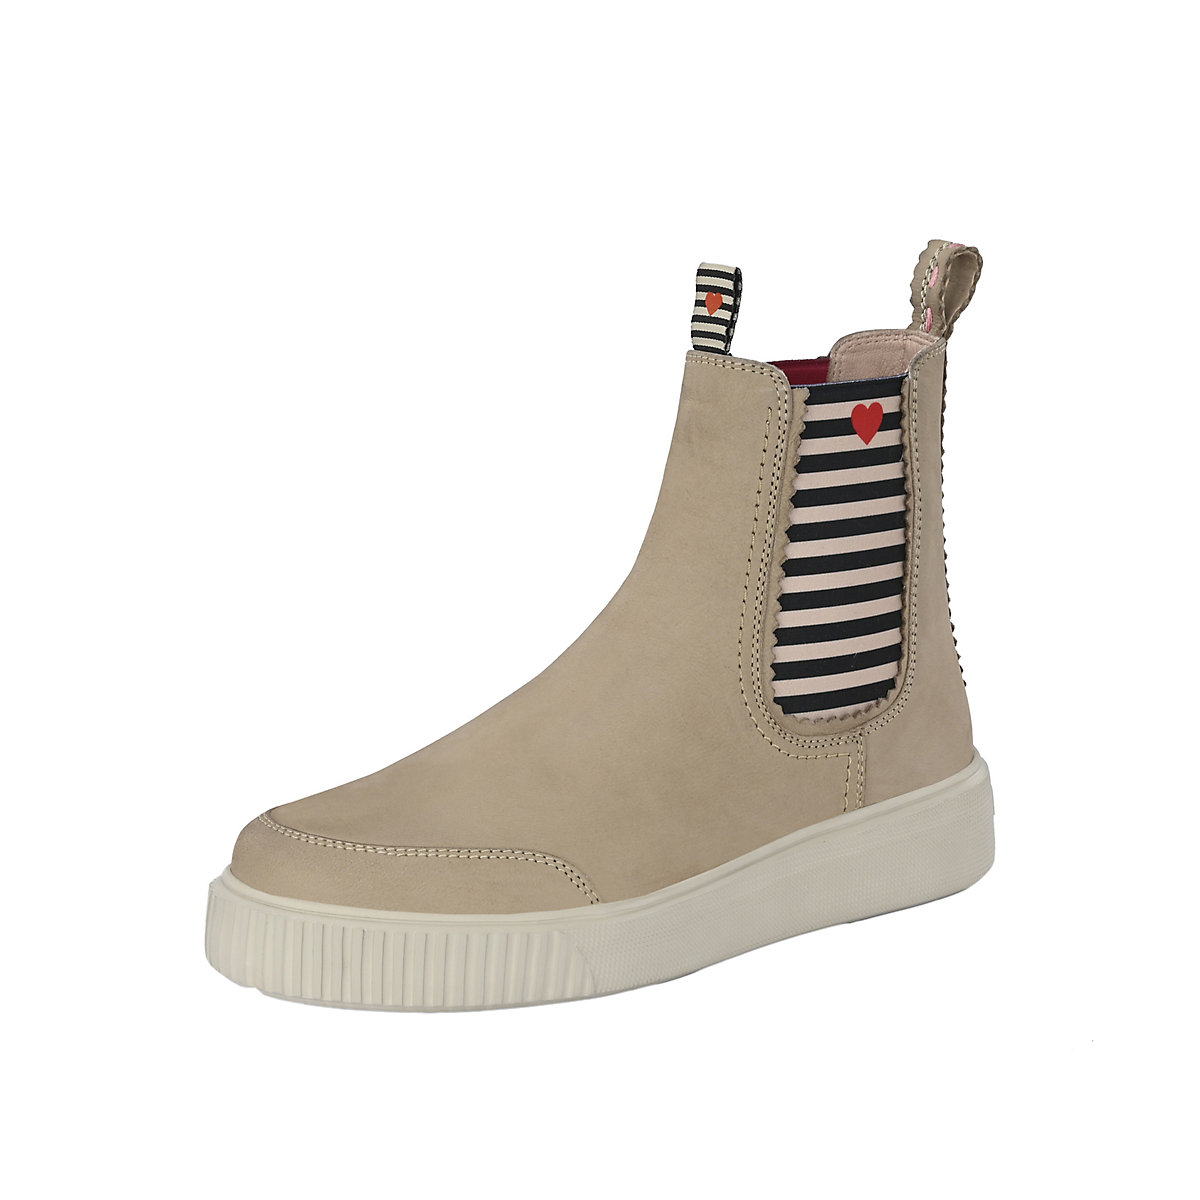 CRICKIT Chelsea Boot JALA Chelsea Boots taupe